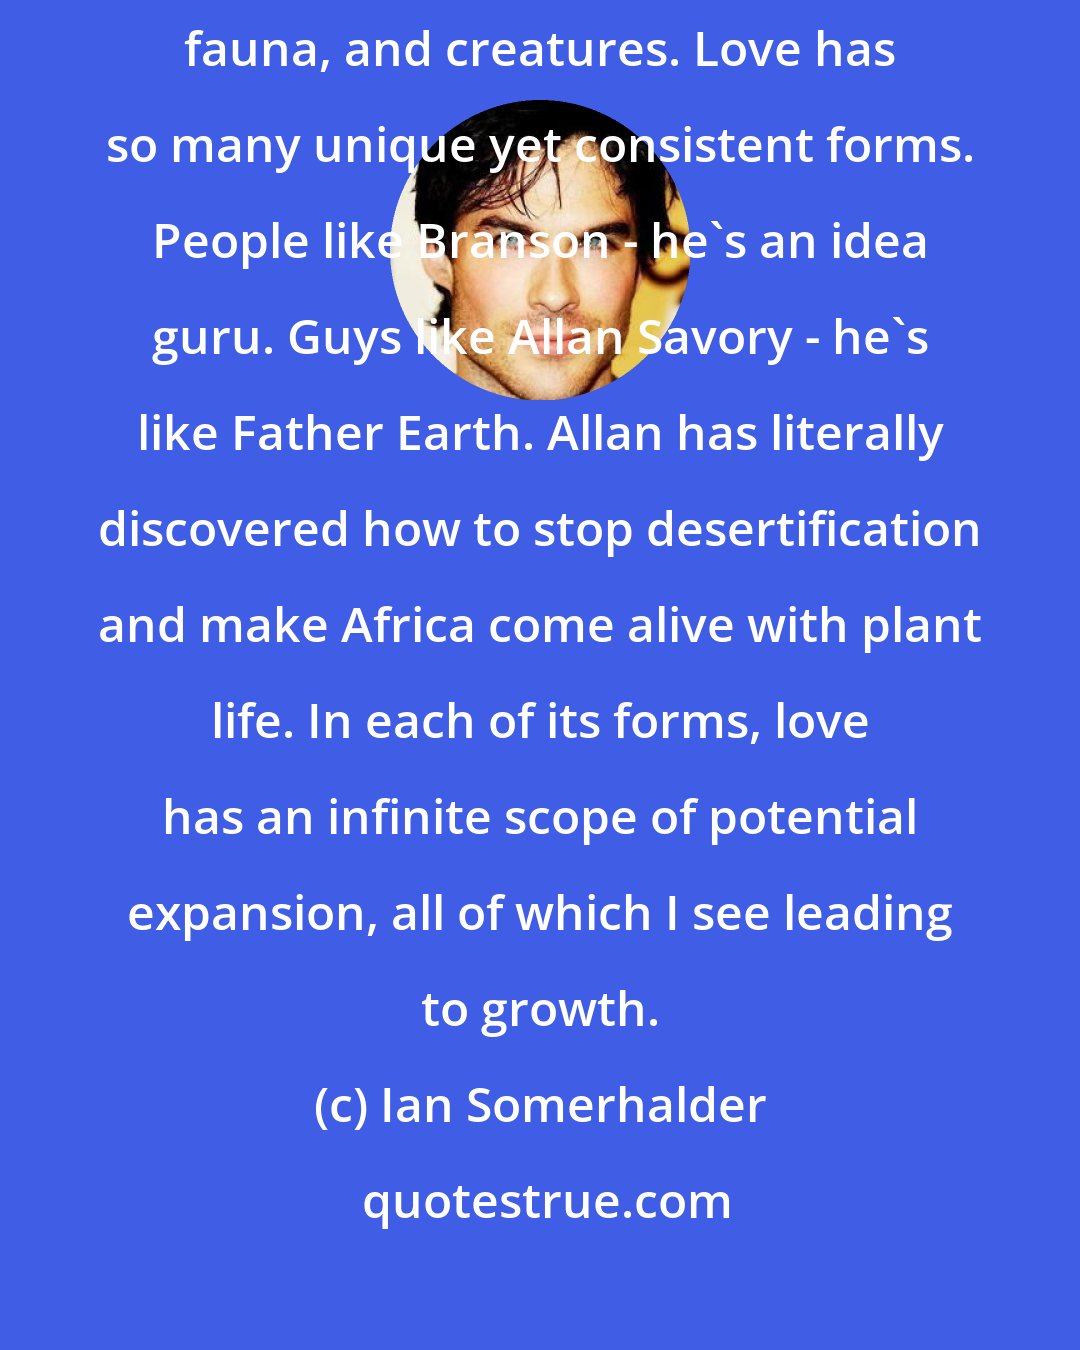 Ian Somerhalder: Whether that expansion is towards the beings around you or flora, fauna, and creatures. Love has so many unique yet consistent forms. People like Branson - he's an idea guru. Guys like Allan Savory - he's like Father Earth. Allan has literally discovered how to stop desertification and make Africa come alive with plant life. In each of its forms, love has an infinite scope of potential expansion, all of which I see leading to growth.